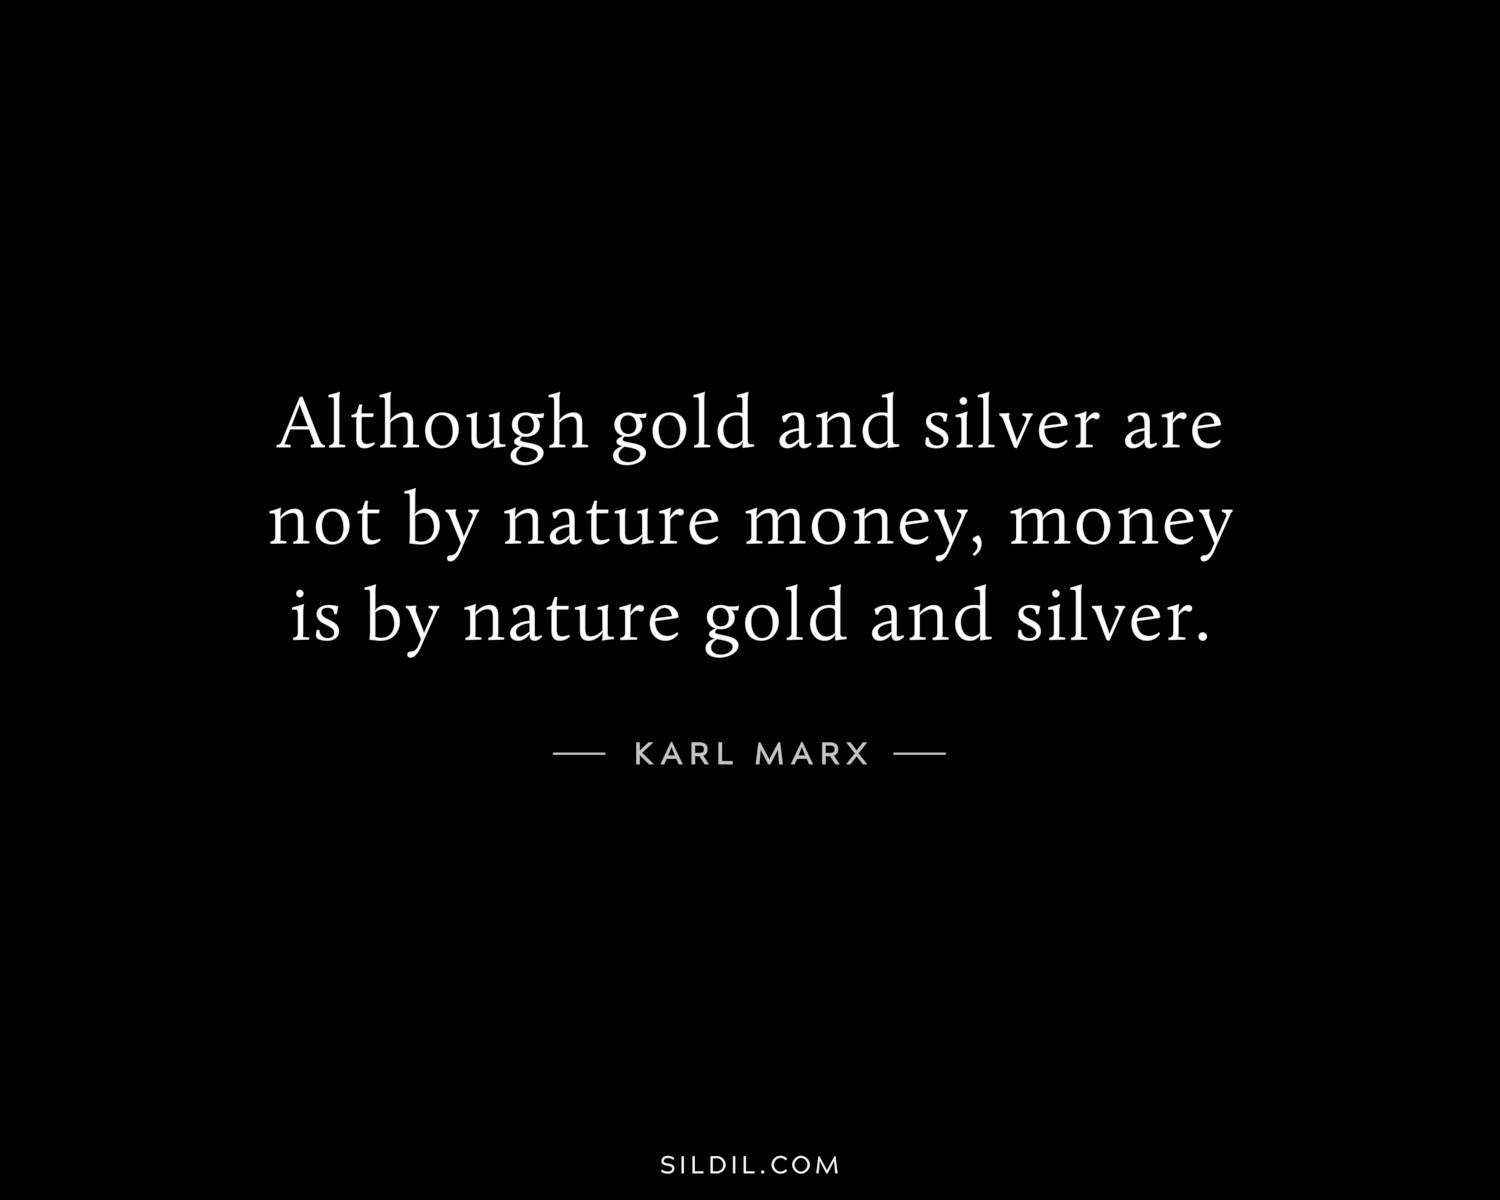 Although gold and silver are not by nature money, money is by nature gold and silver.